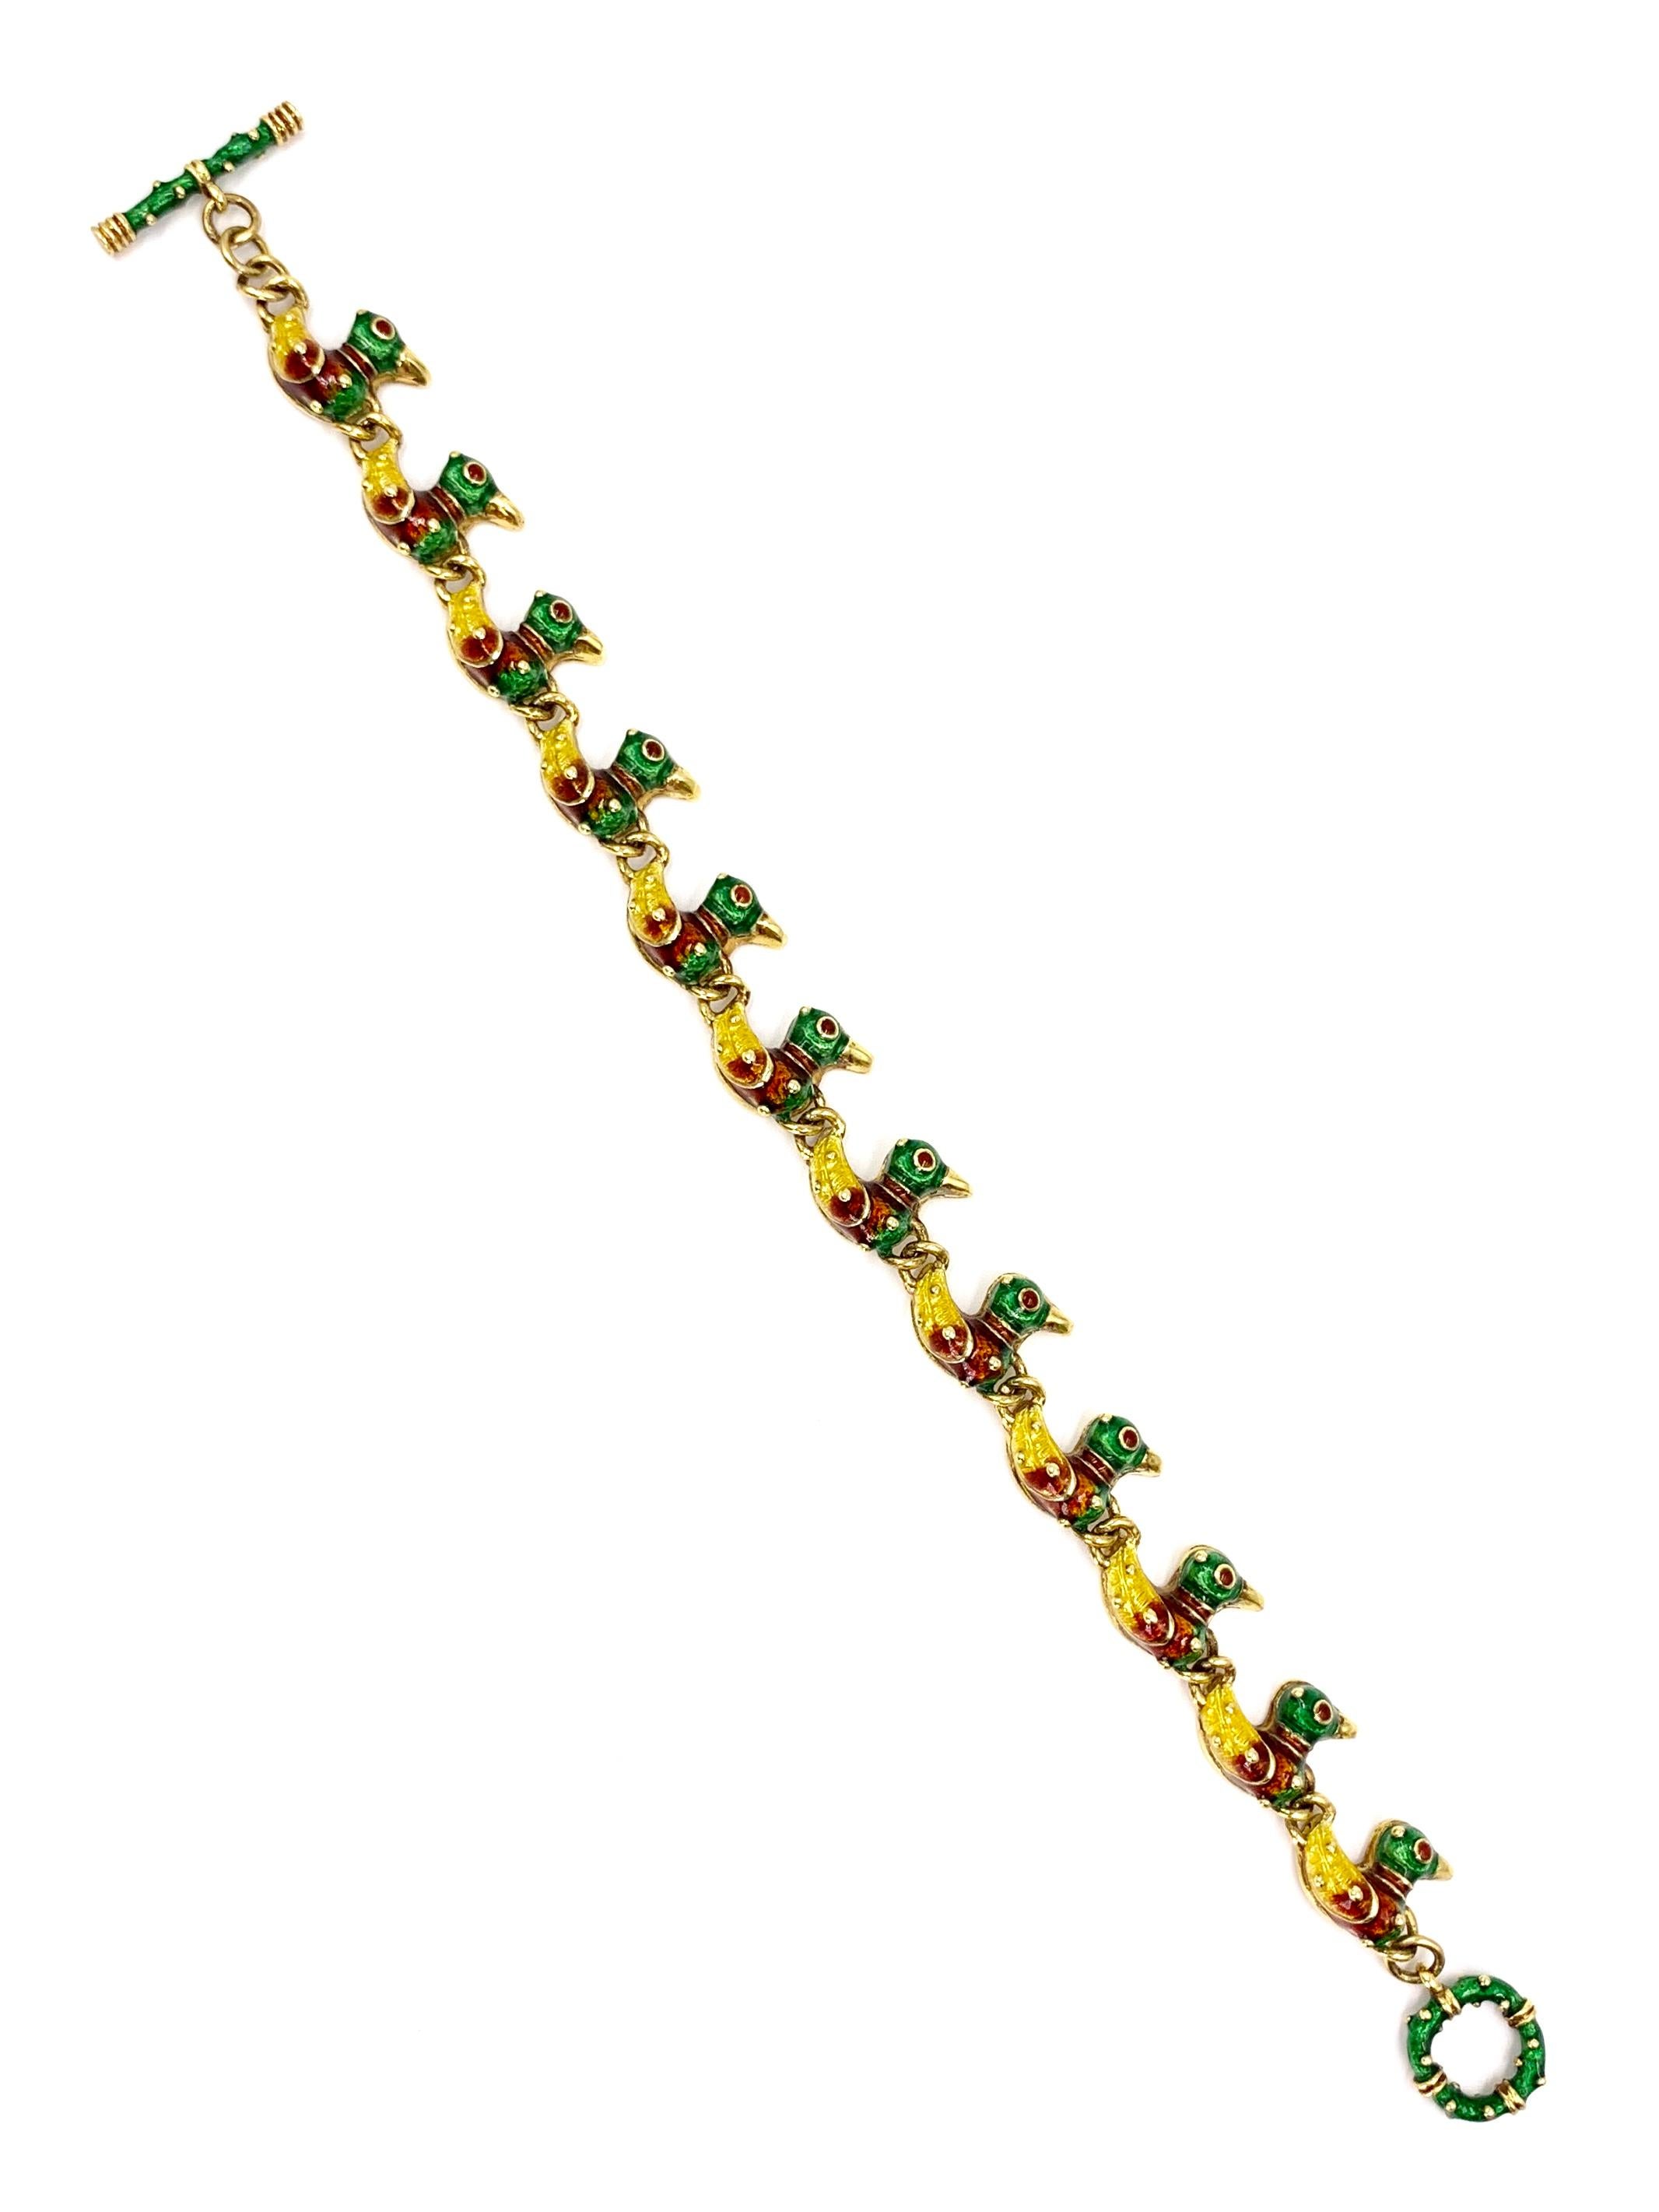 Made by expert enamel fine jewelry designer, HIDALGO. This 18 karat yellow gold toggle clasp bracelet features 12 adorable mallard duck links with hand painted golden yellow, auburn brown and forest green enamel. Ducks measure 10mm from top of head